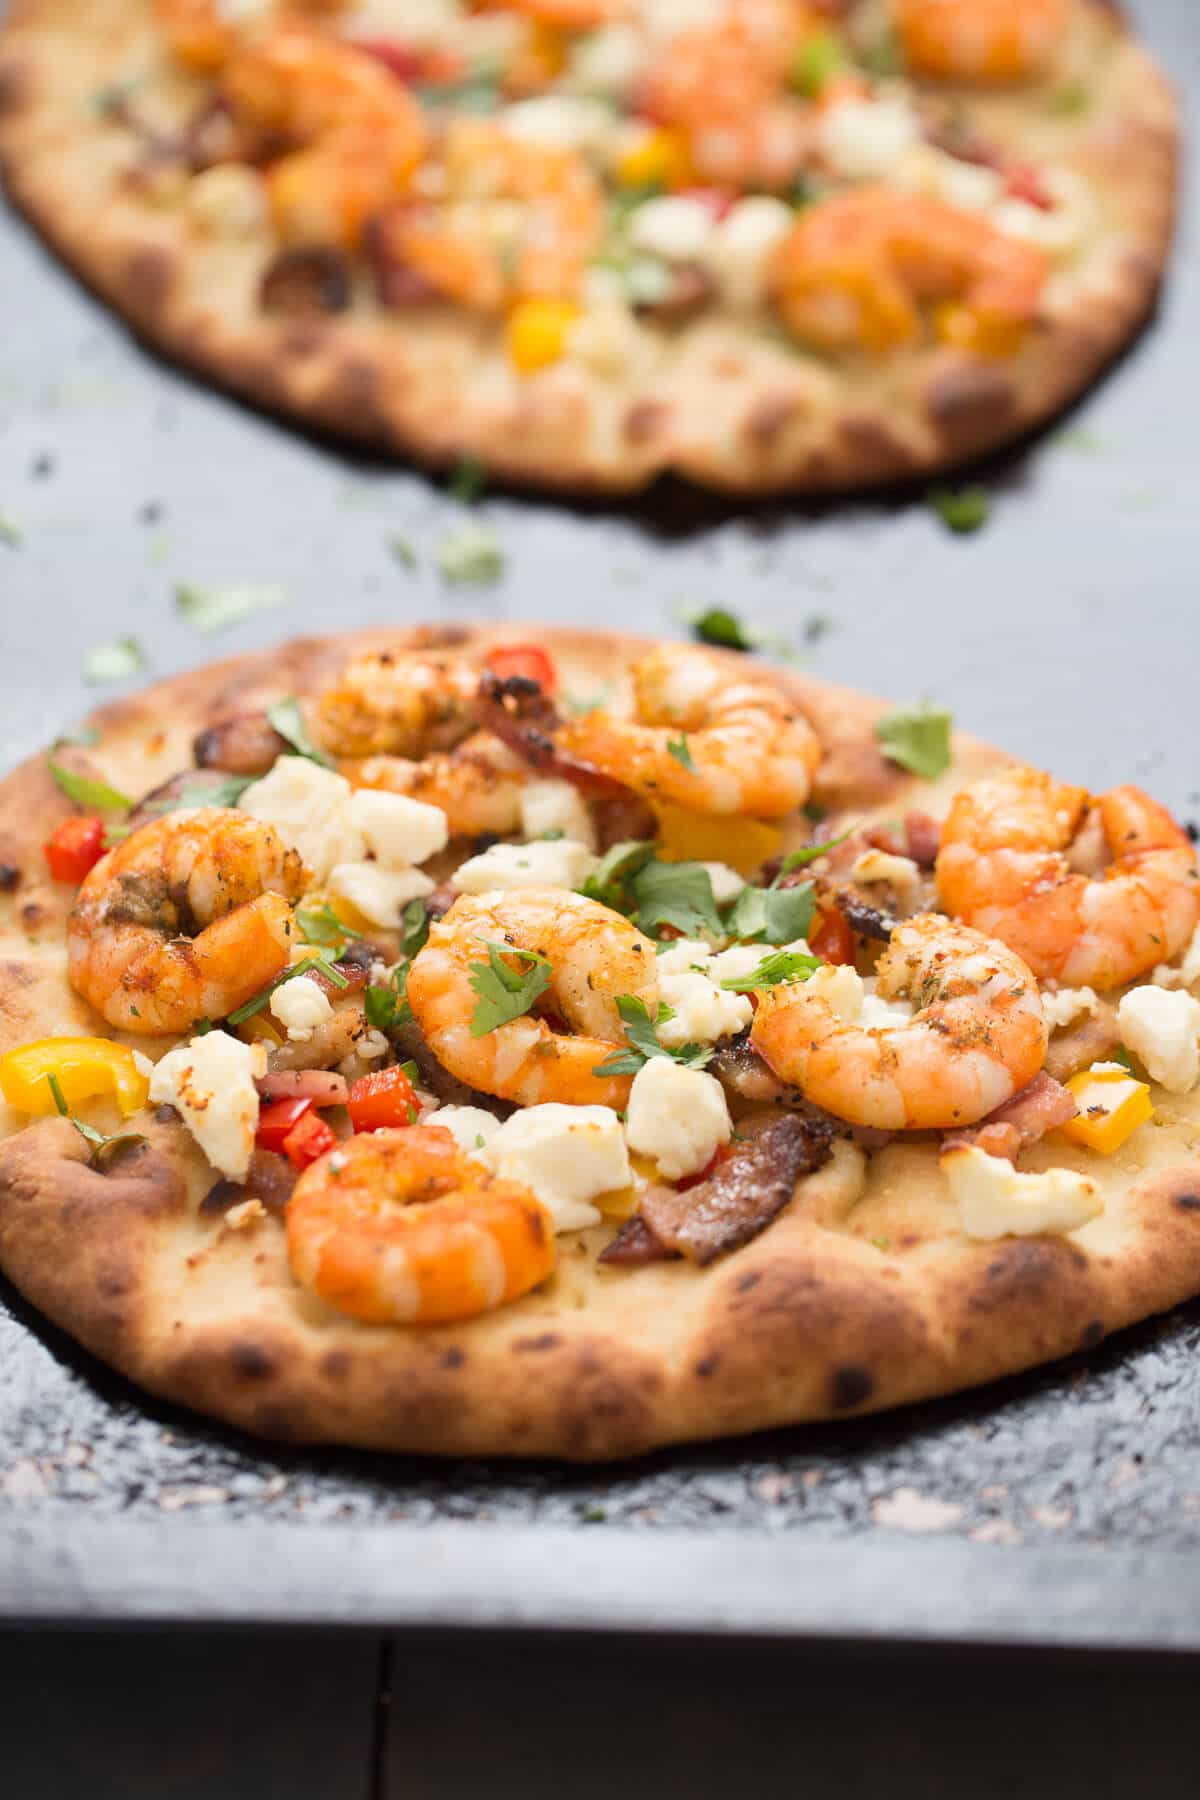 A Cajun shrimp pizza made a naan bread that takes minutes to make! Serve this as a meal or even as an appetizer!